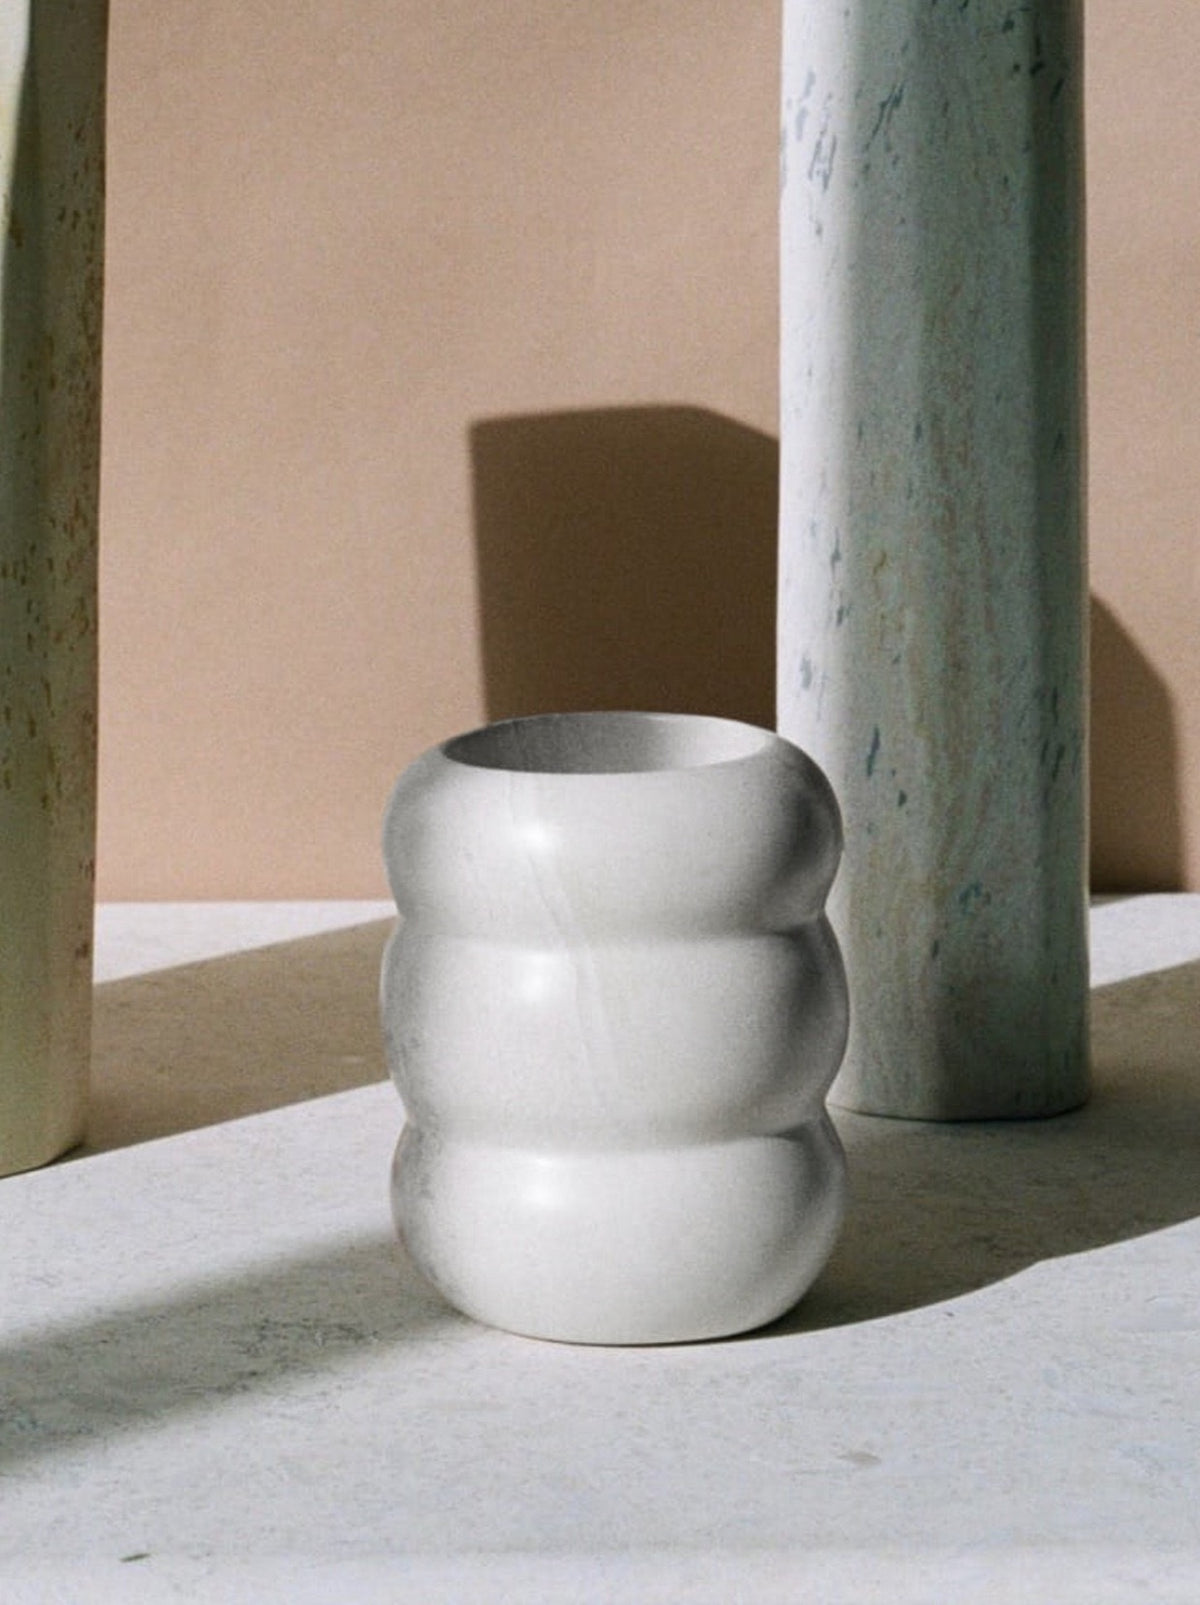 A Roll Vessel - White vase sits on a table next to two other vases.